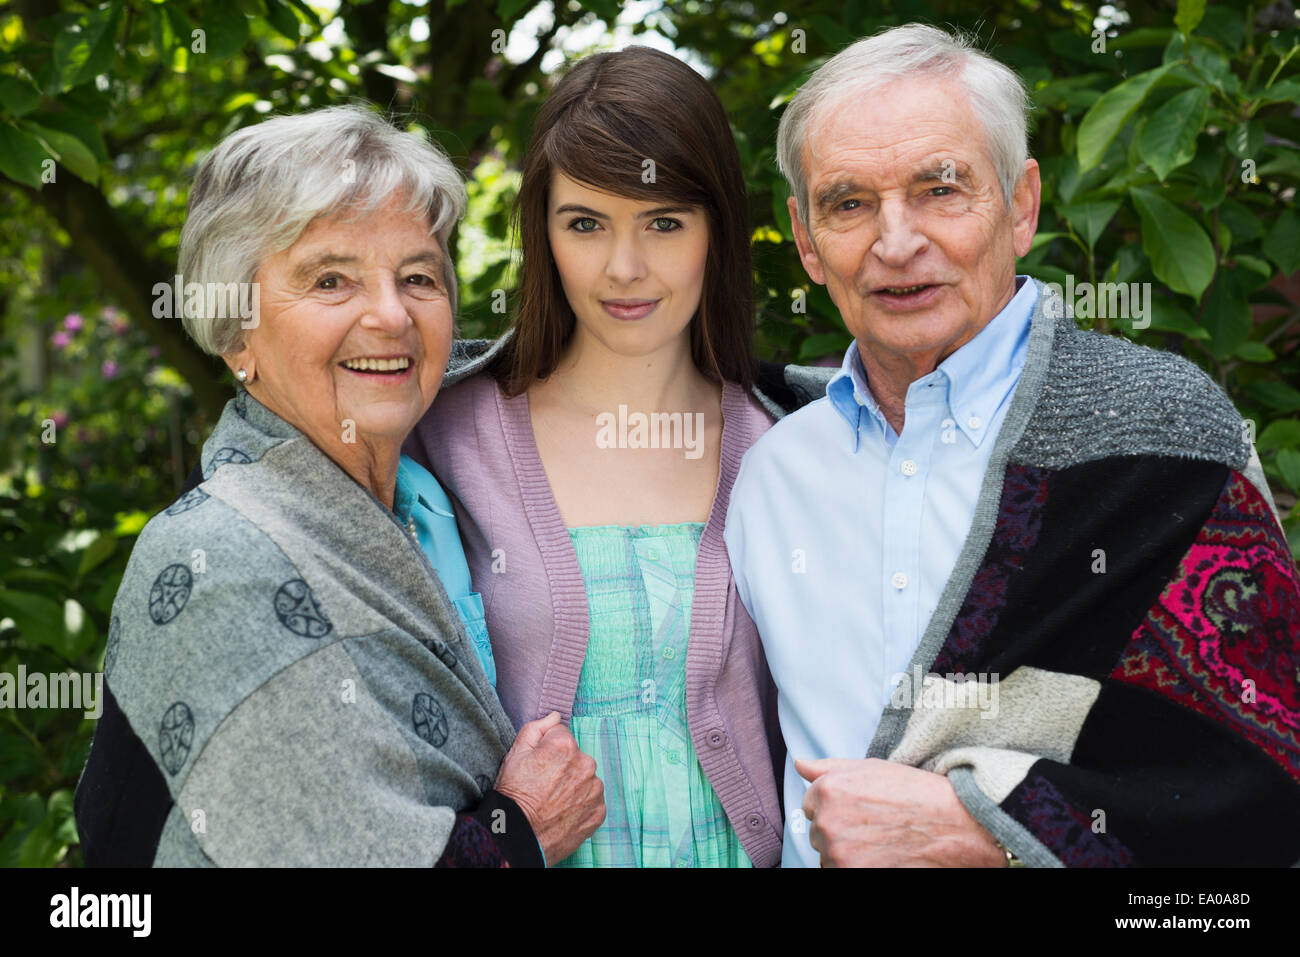 Grandparents and granddaughter in garden Stock Photo